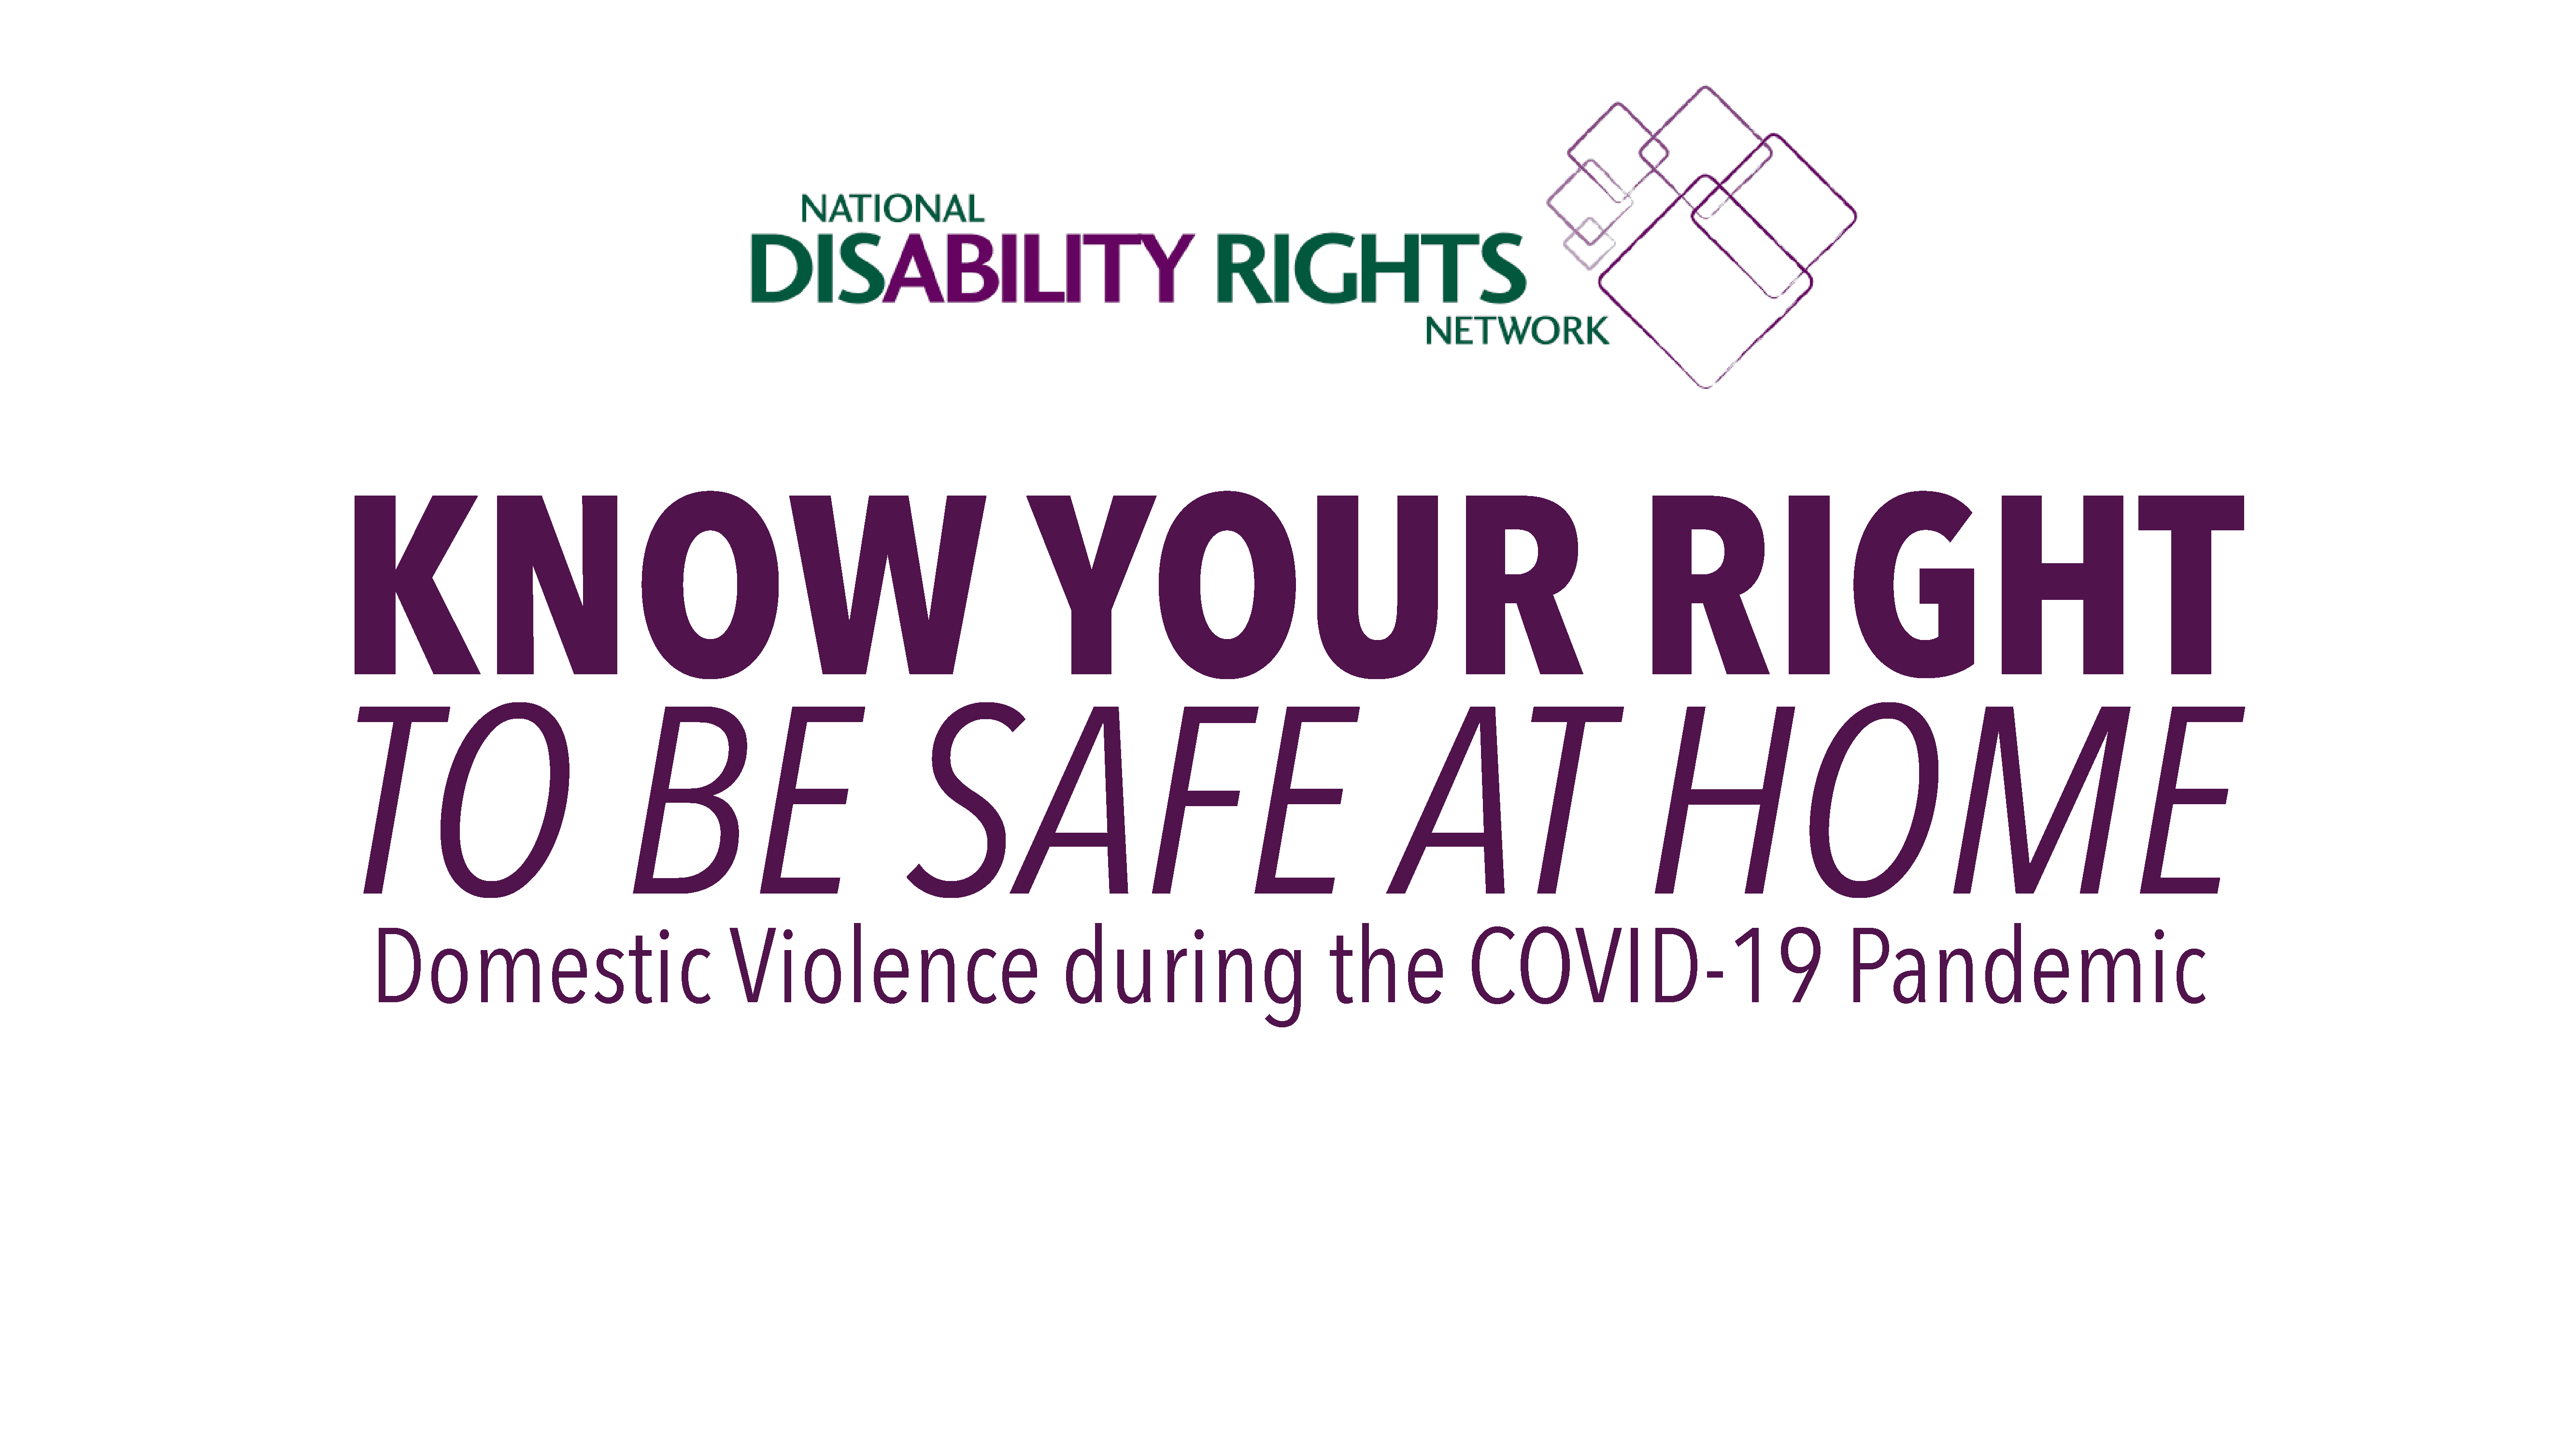 KNOW YOUR RIGHT TO BE SAFE AT HOME Domestic Violence during the COVID-19 Pandemic